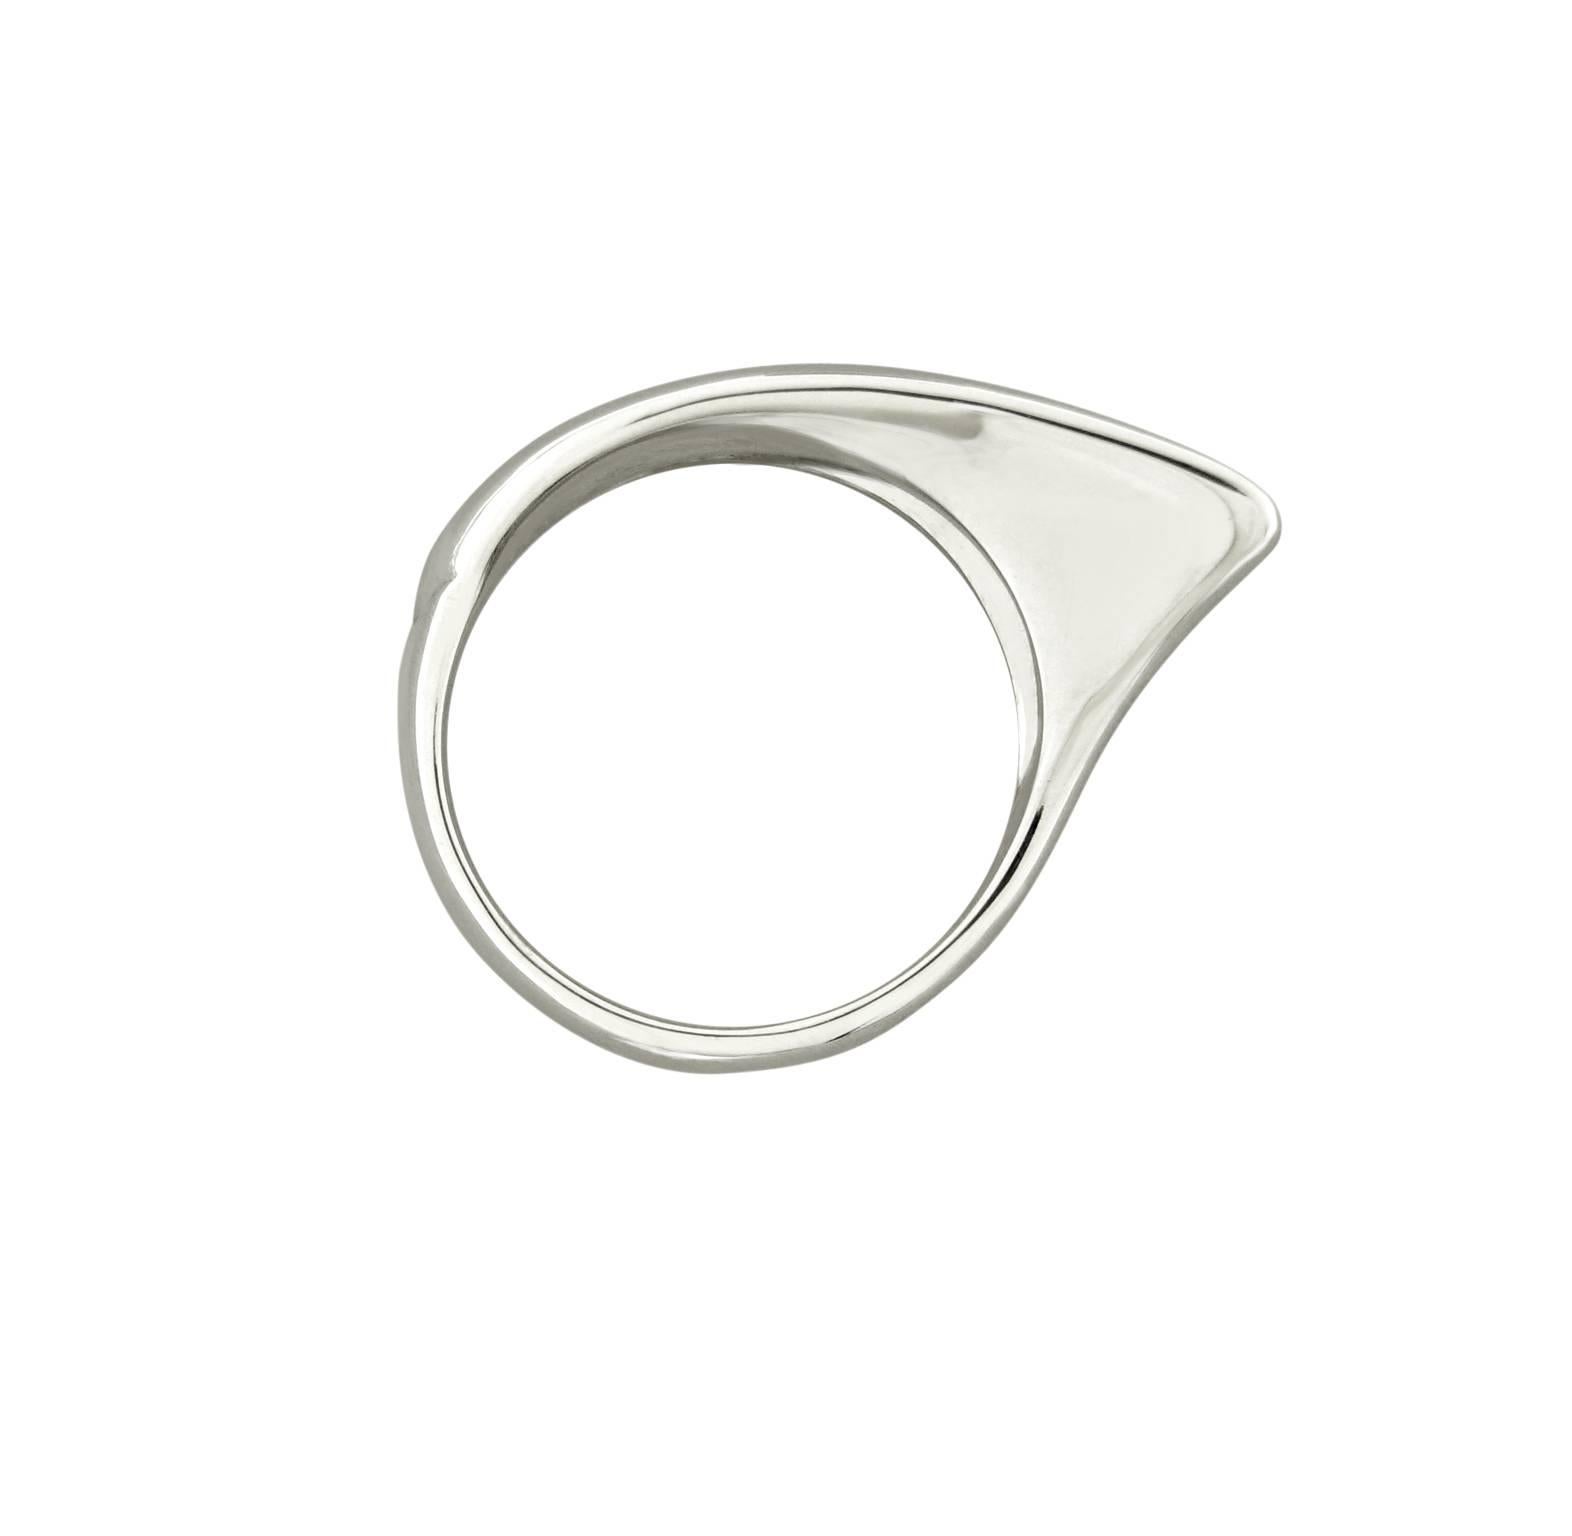 Timeless contemporary sculptured band ring in 18k white gold. The ring features a slim, wing-shaped, ergonomical design originally conceived for the right hand, and 4 sparkling round brilliant cut diamonds of total 0.25ct.
Ring size 6.5, EU